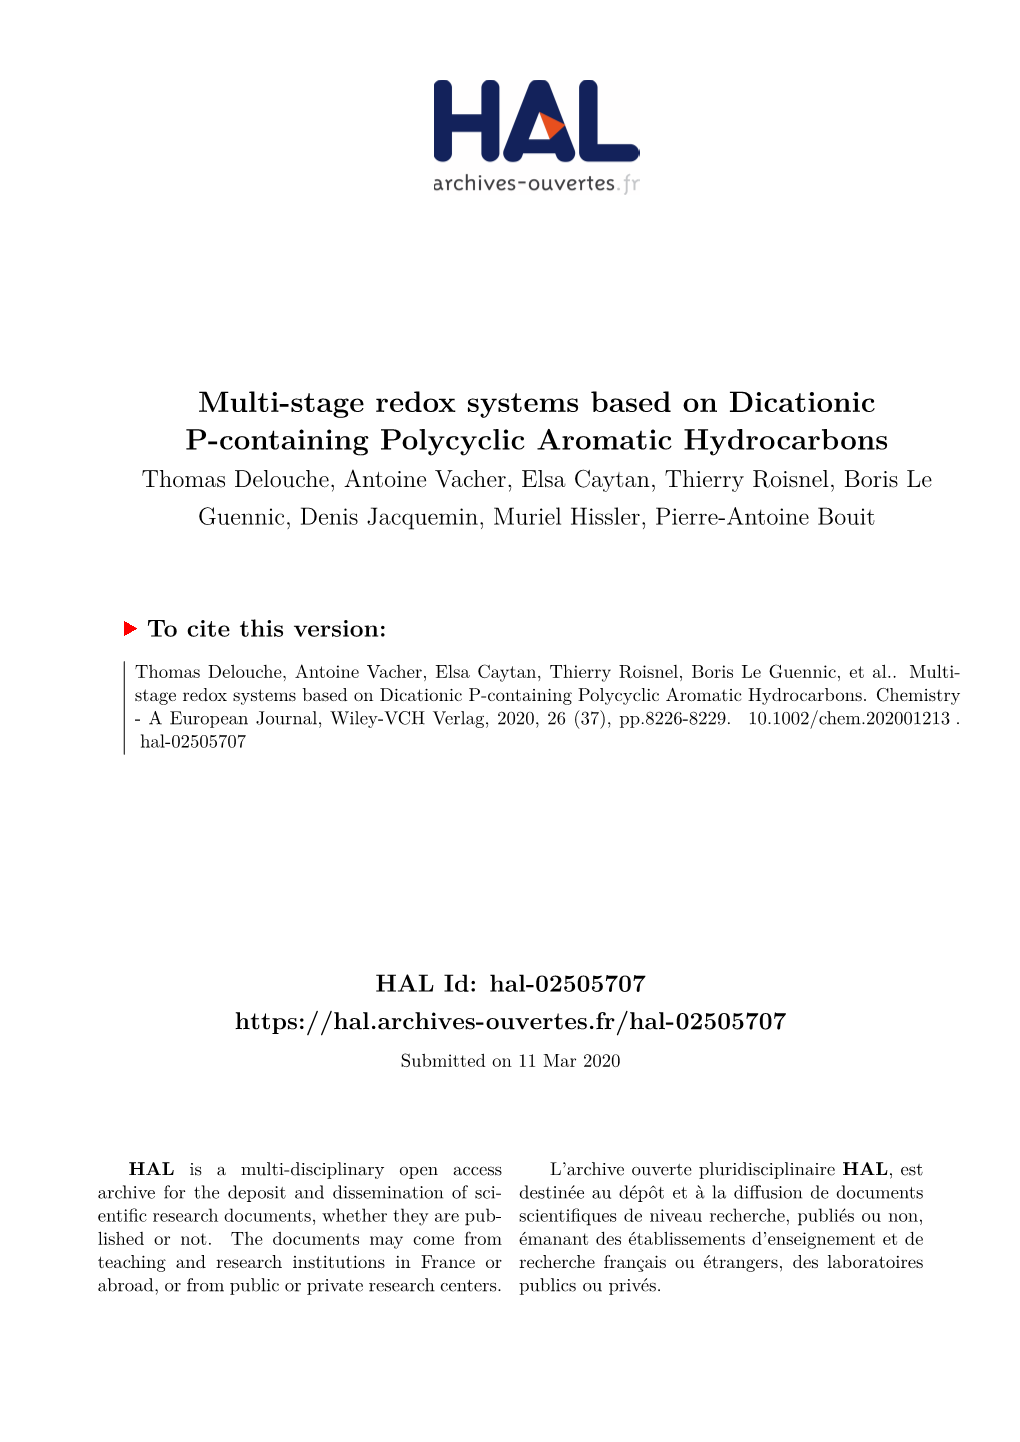 Multi-Stage Redox Systems Based on Dicationic P-Containing Polycyclic